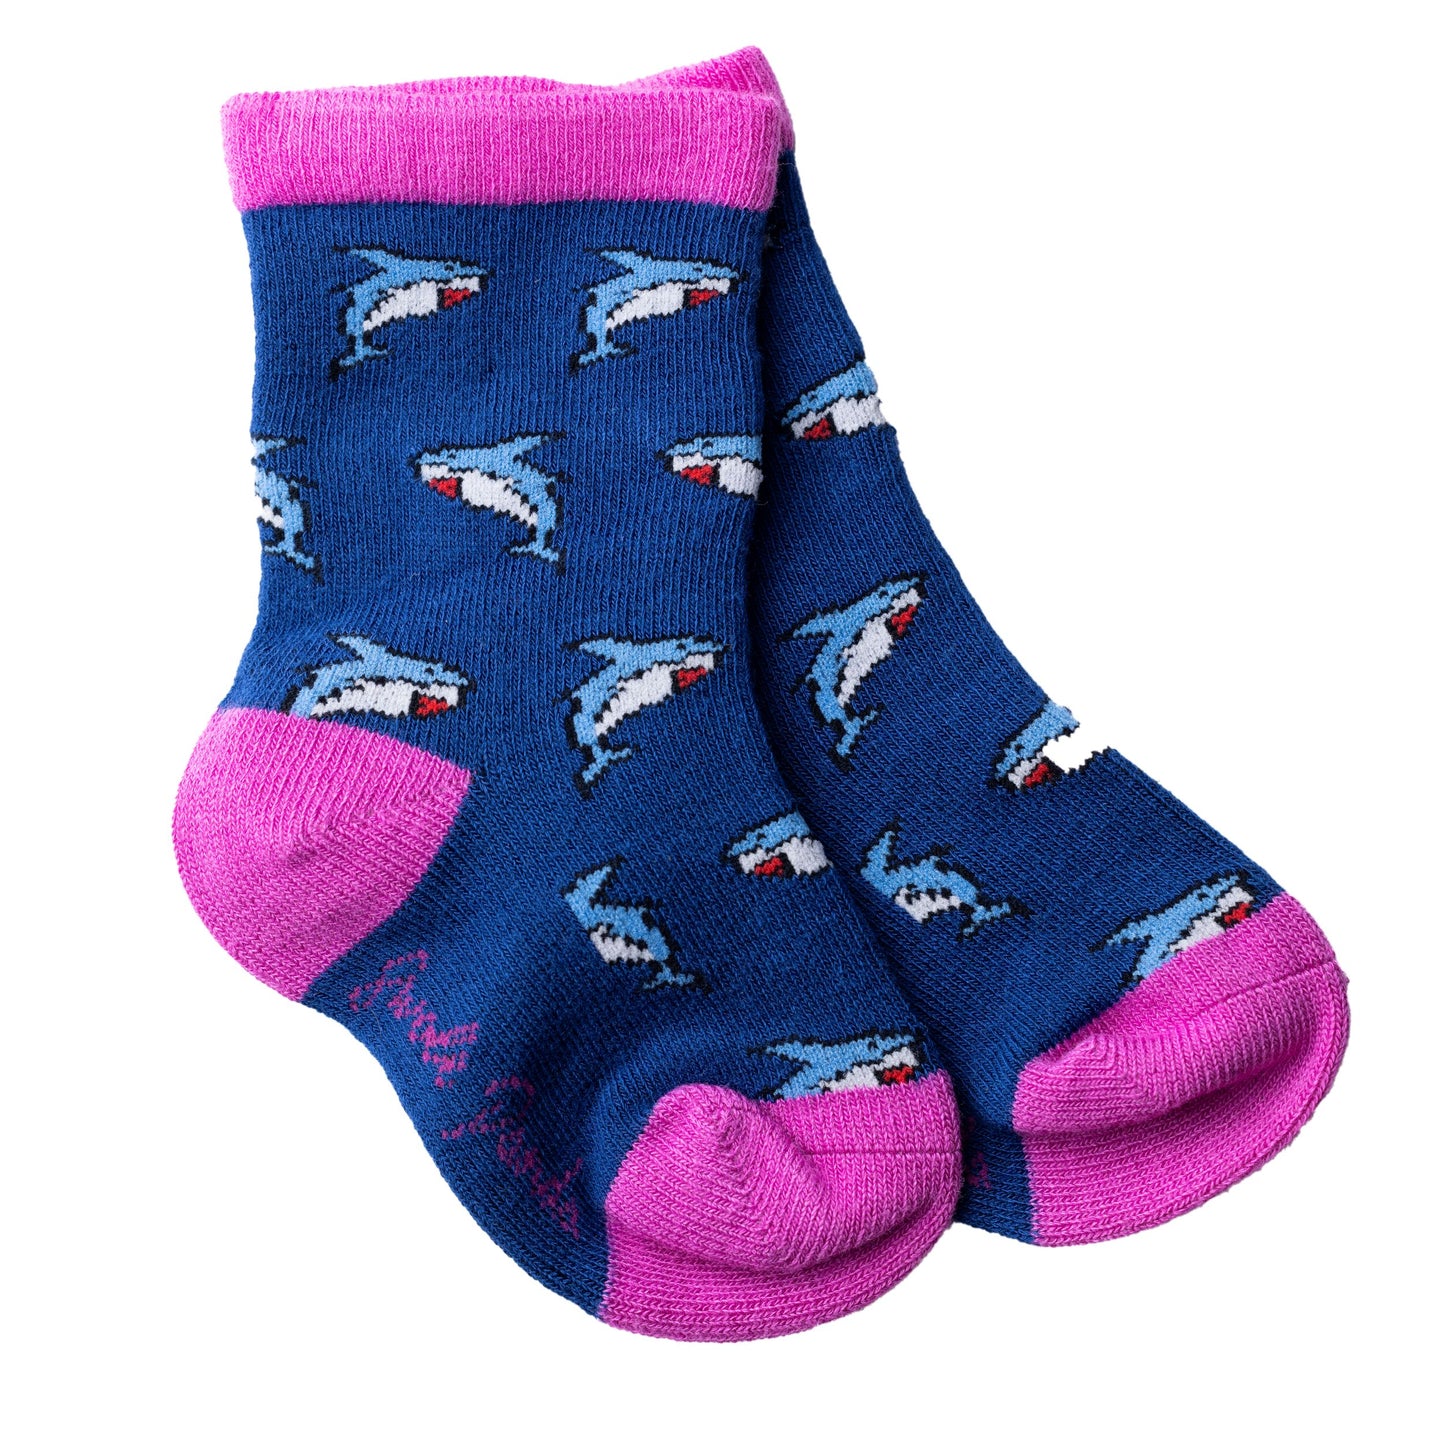 Children's Bamboo Shark Socks (can be matched with an adult pair)